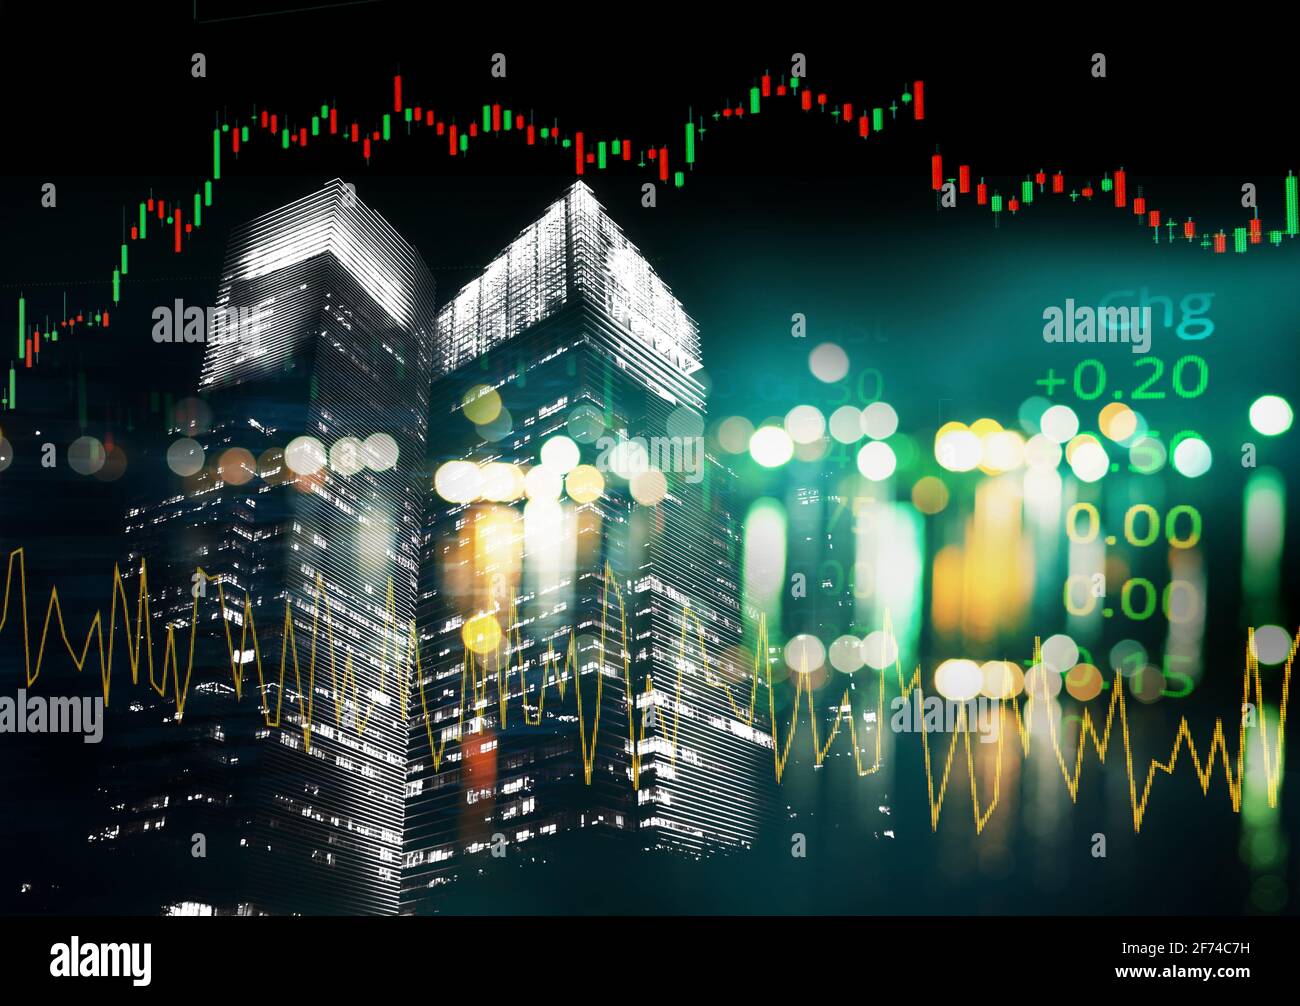 candle stick graph line of trade stock market and index number on glow city building light business background Stock Photo